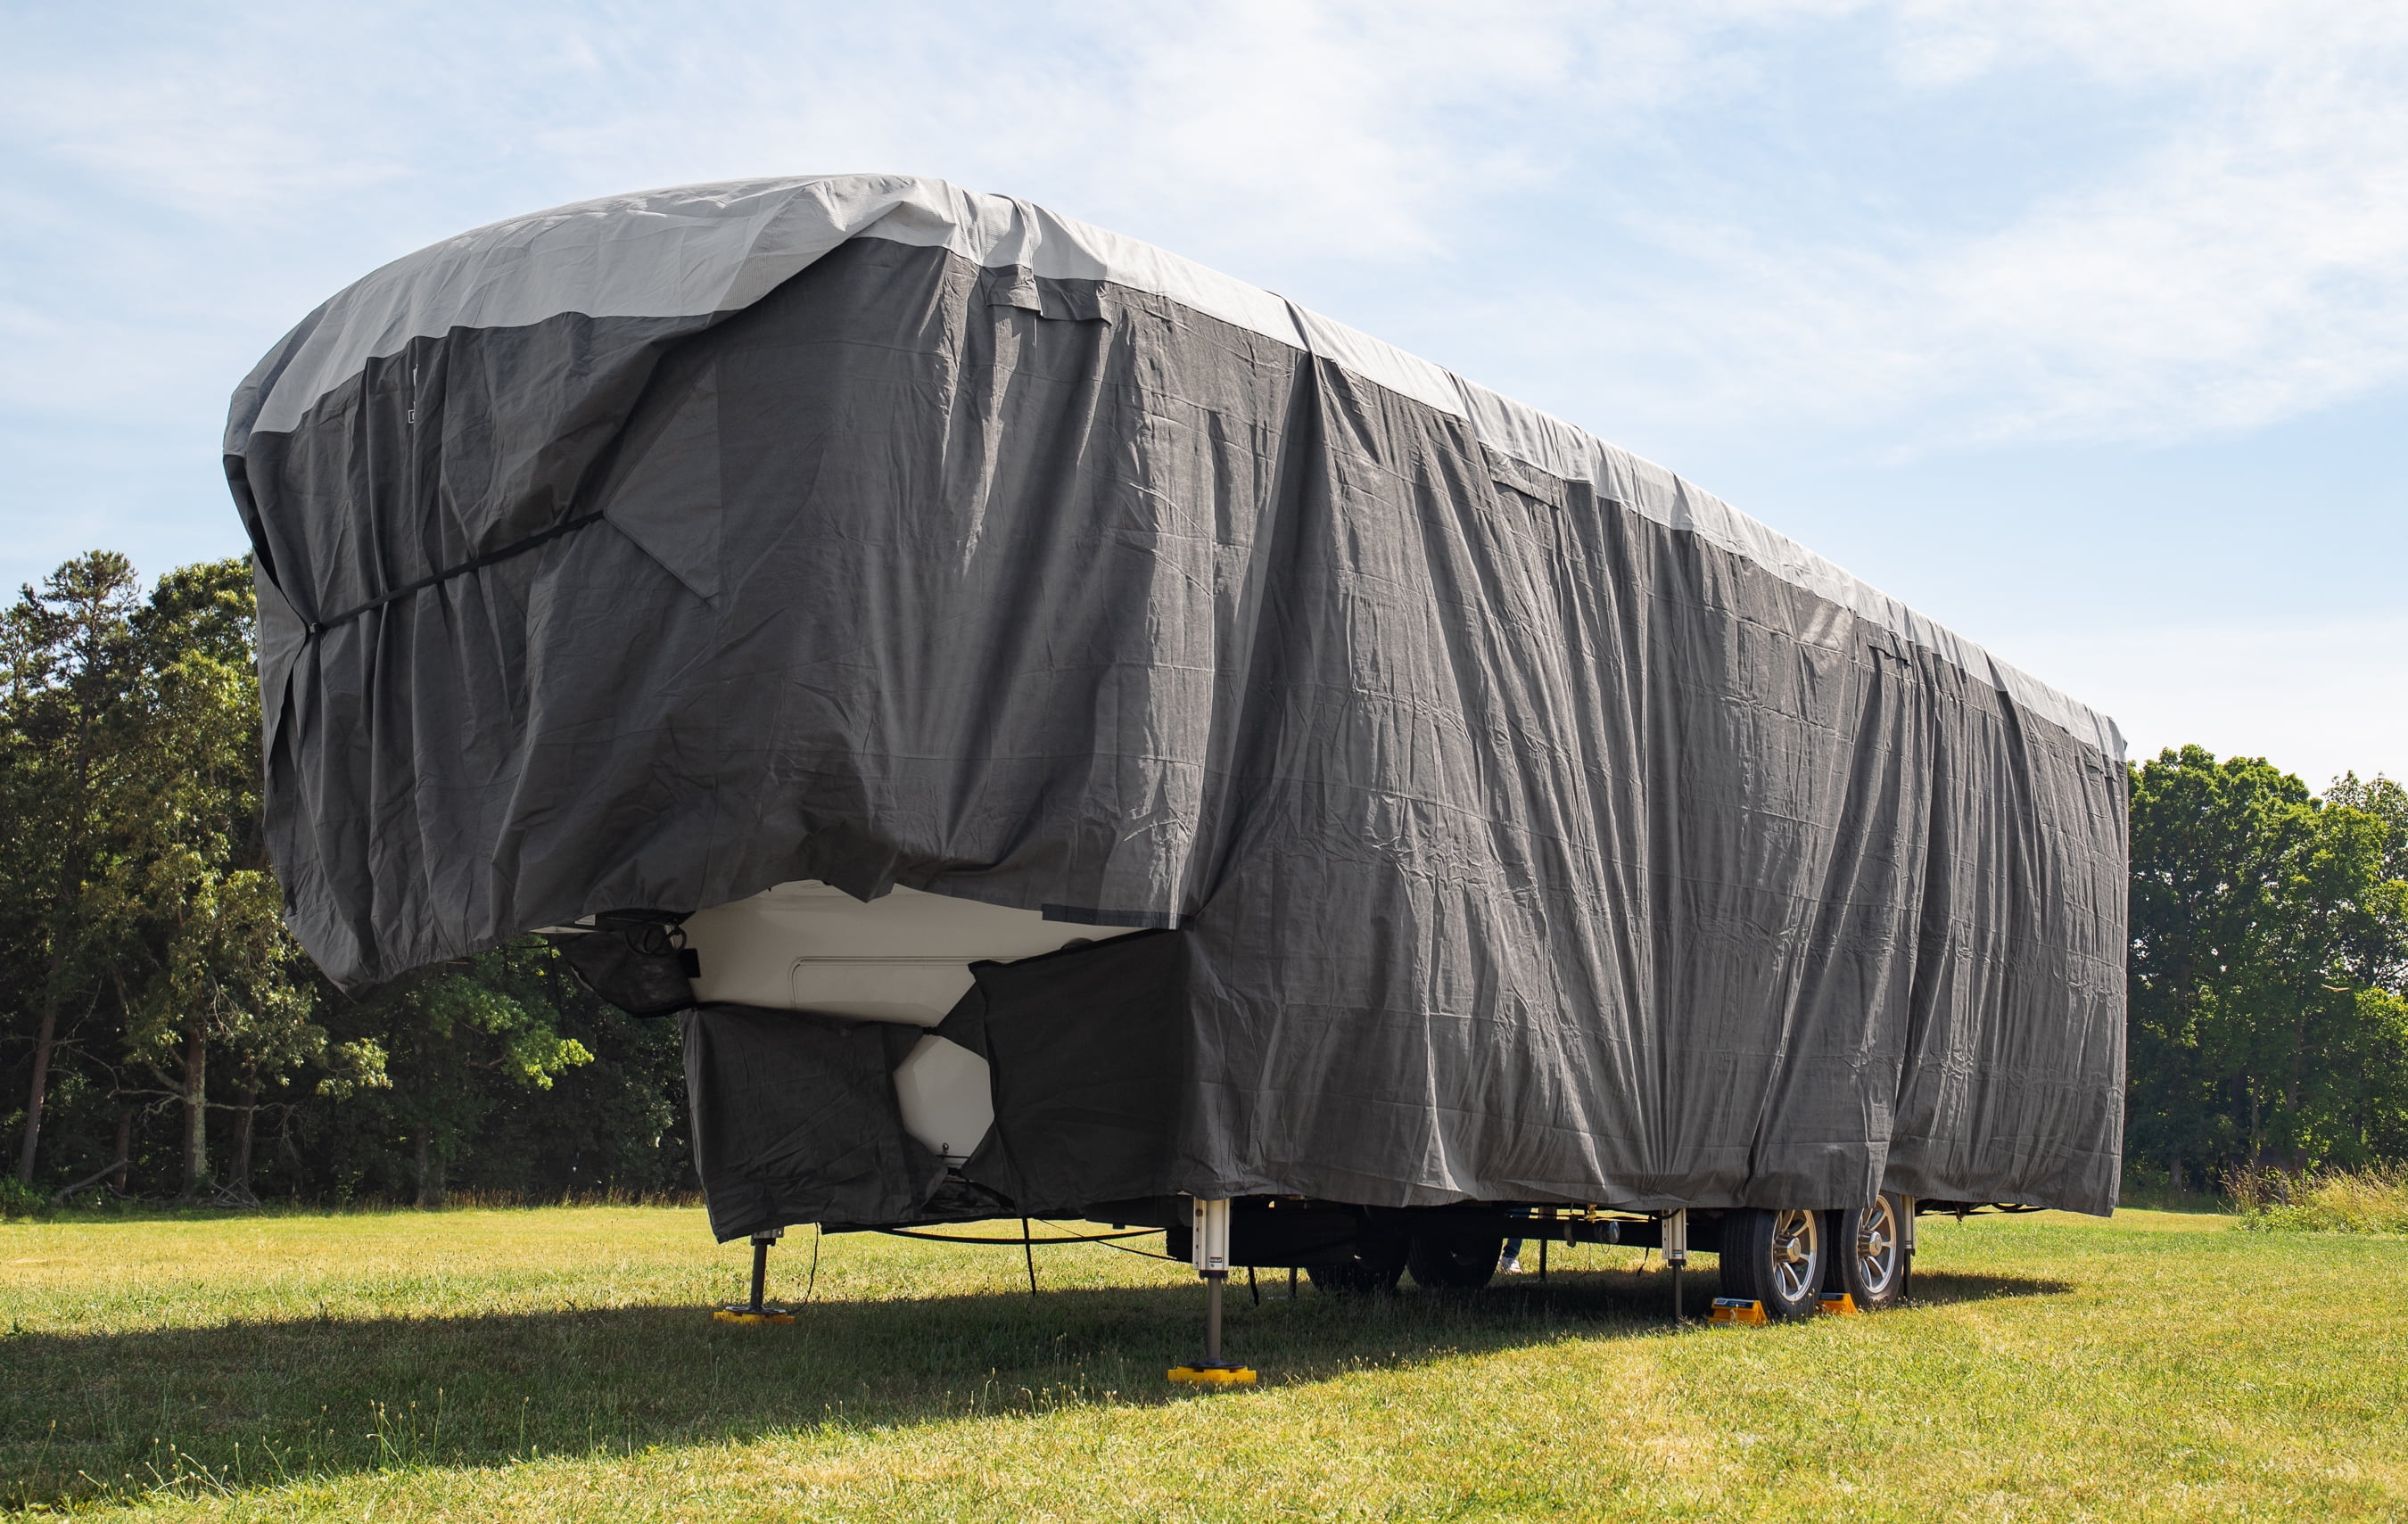 Camco ULTRAGuard RV Cover Fits Fifth Wheel Trailers 40 to 42-feet  Extremely Durable Design that Protects Against the Elements (45759) 